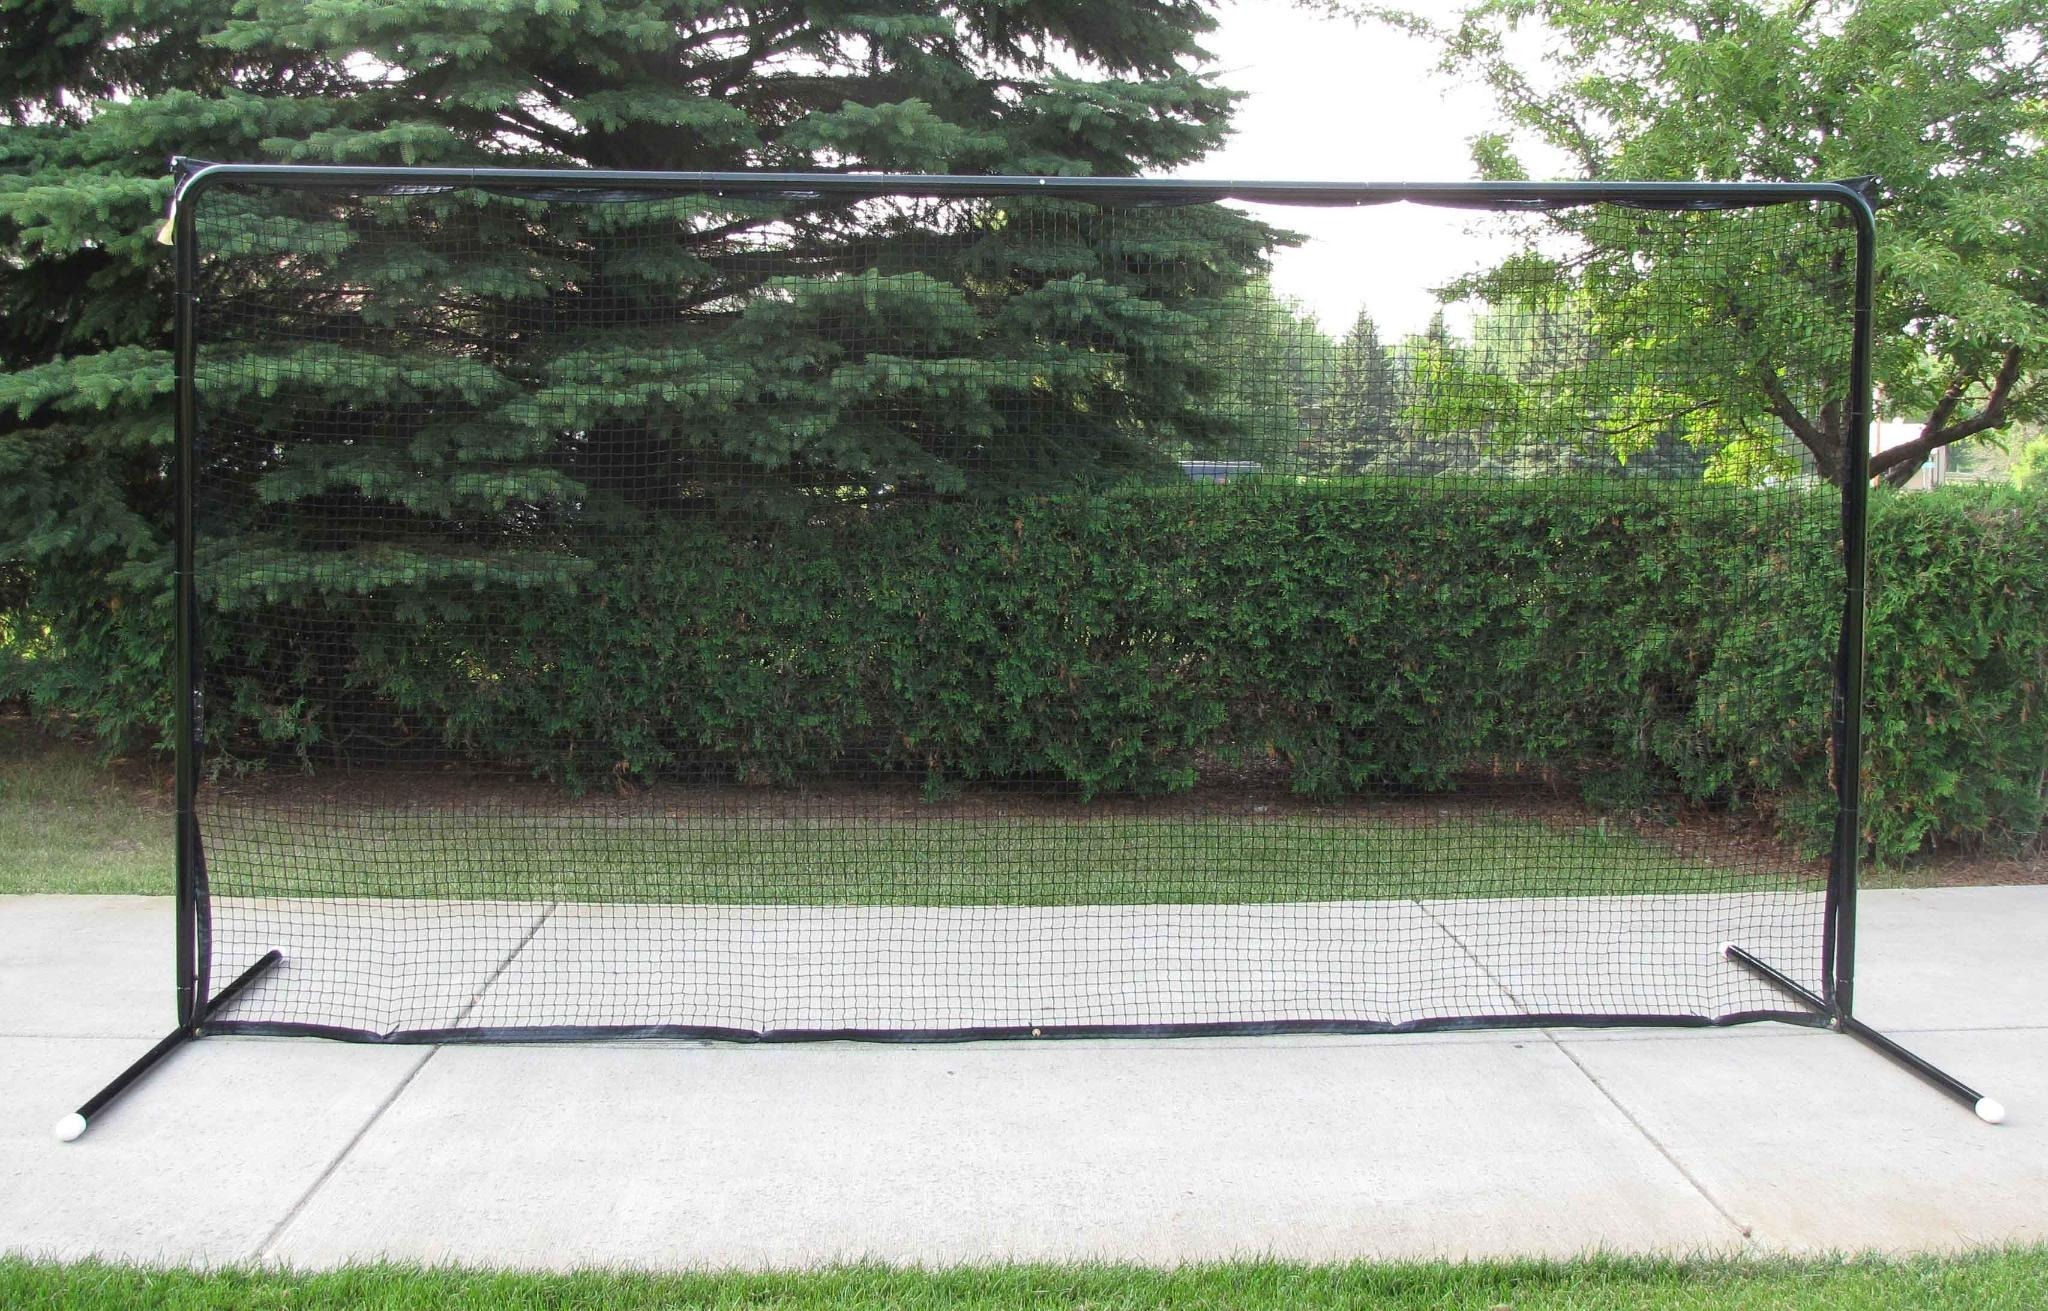 14.5’ x 7.5’ Straight, Self-Standing, 2-Pole Steel Backstop with Premium Black Powder-Coated Finish; Great for Containing Balls and Pucks in Your Backyard.